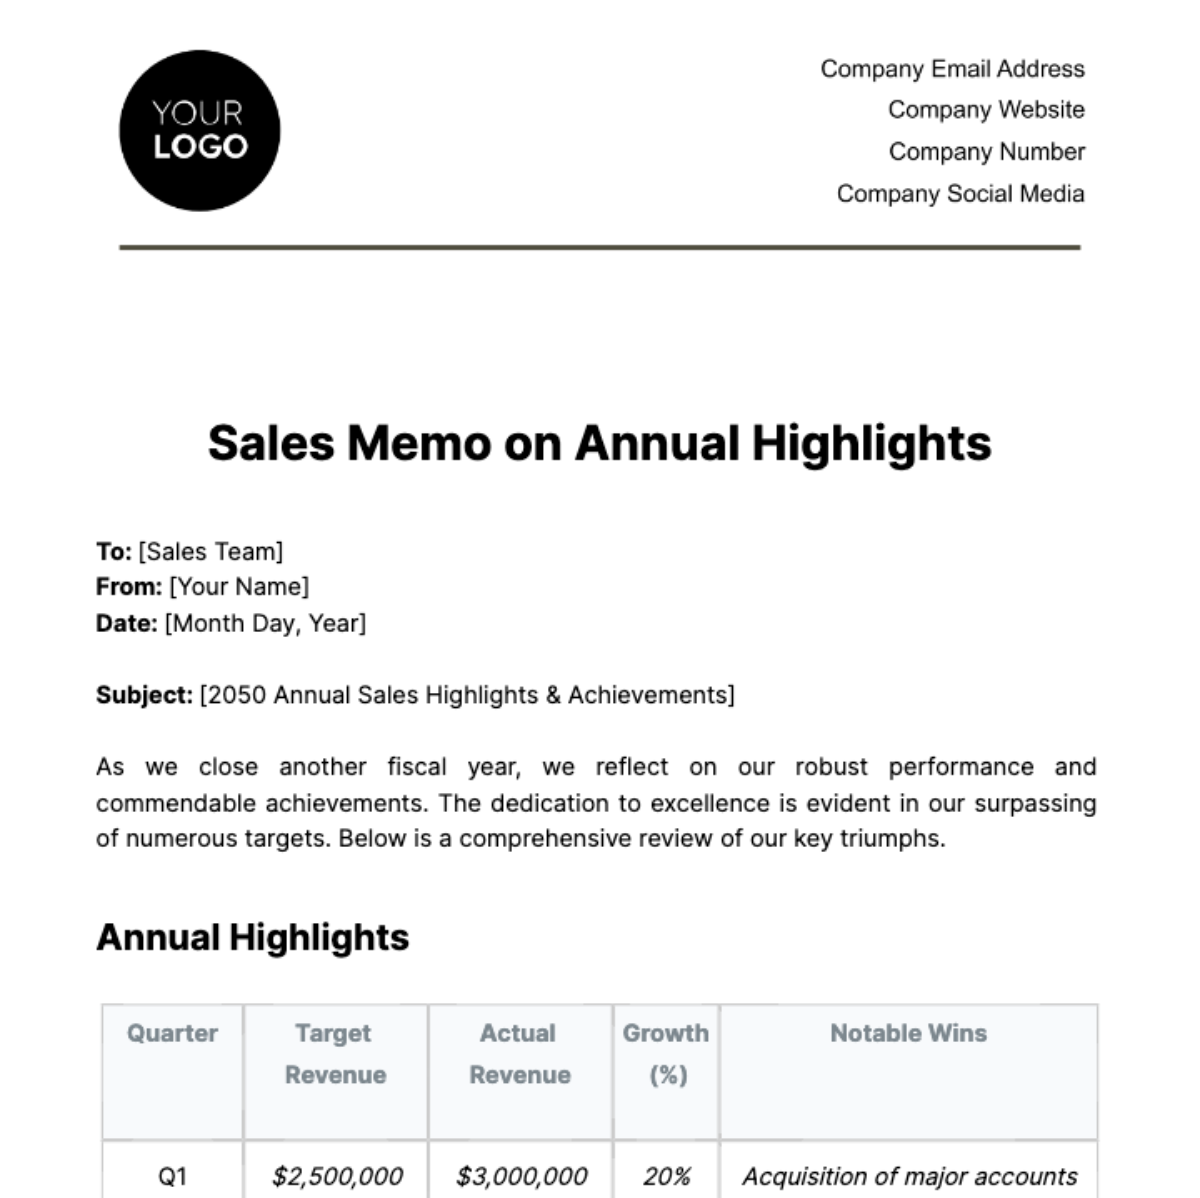 Free Sales Memo on Annual Highlights Template